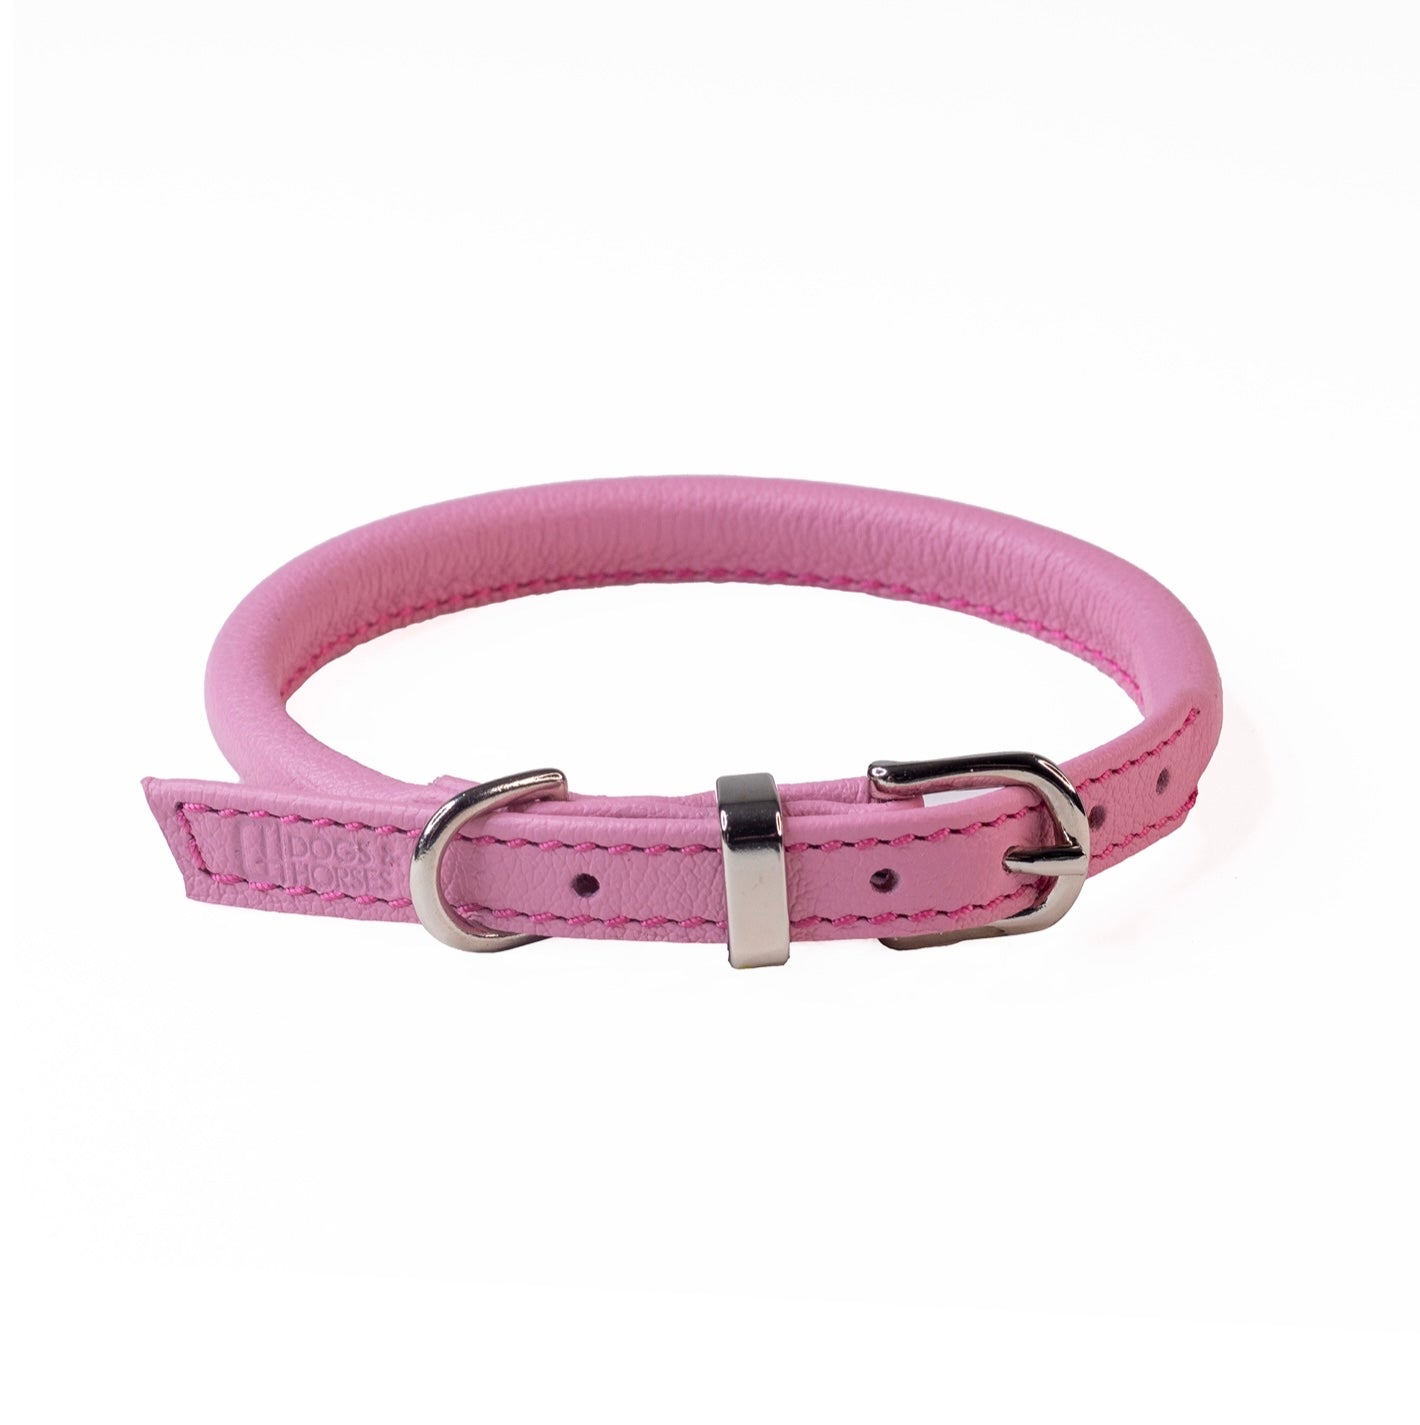 Dogs & Horses Rolled Soft Leather Collar Pink